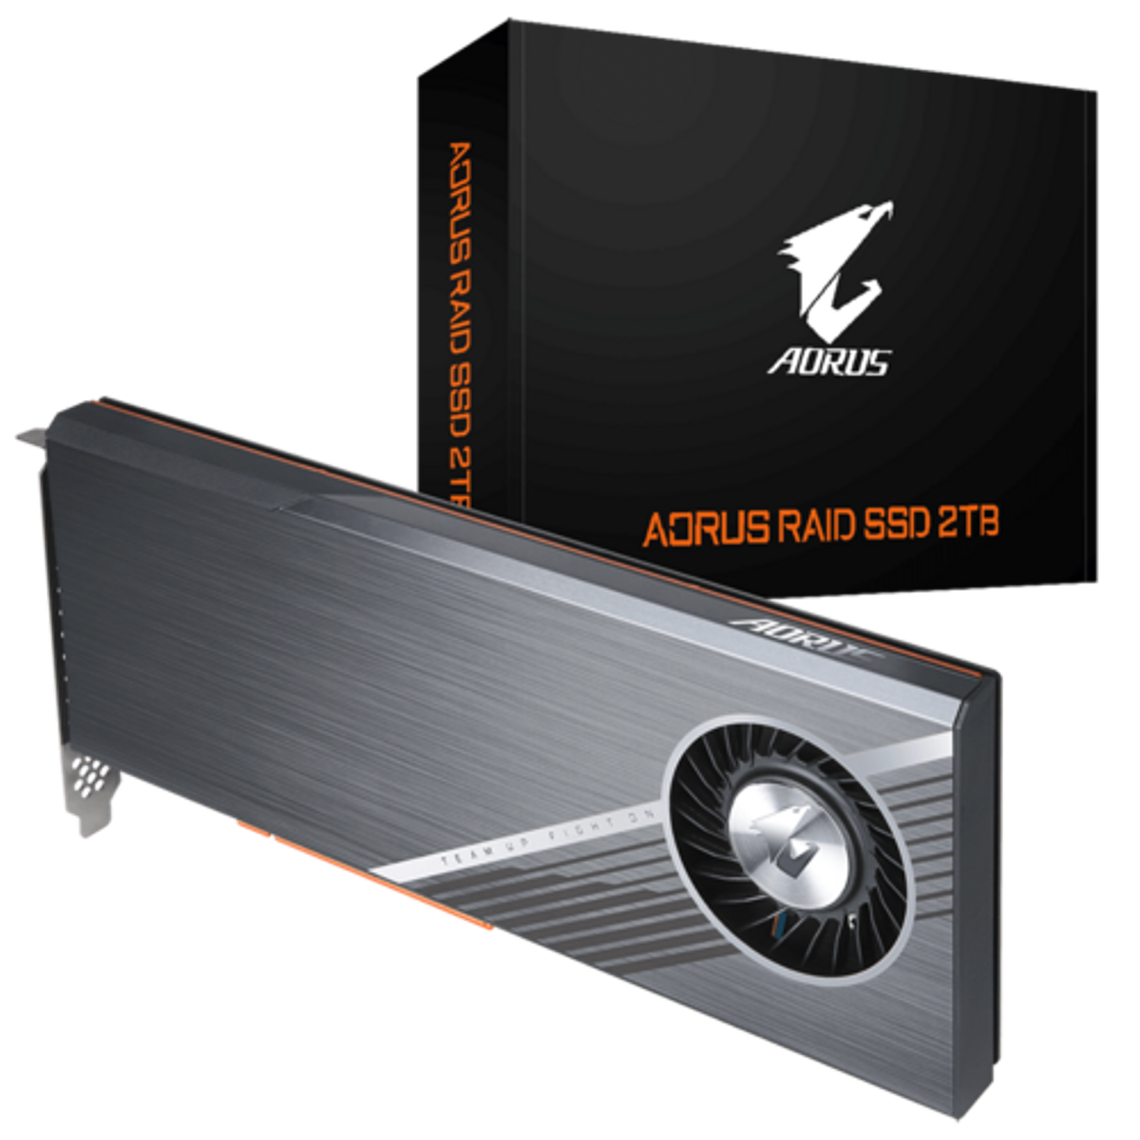 Gigabyte Aorus Raid SSD 2 To - PCI Express 3.0 8x - NVMe 1.3 - Lecture sequentielle : 6300 Mo/s - Ecriture sequentielle : 6000 Mo